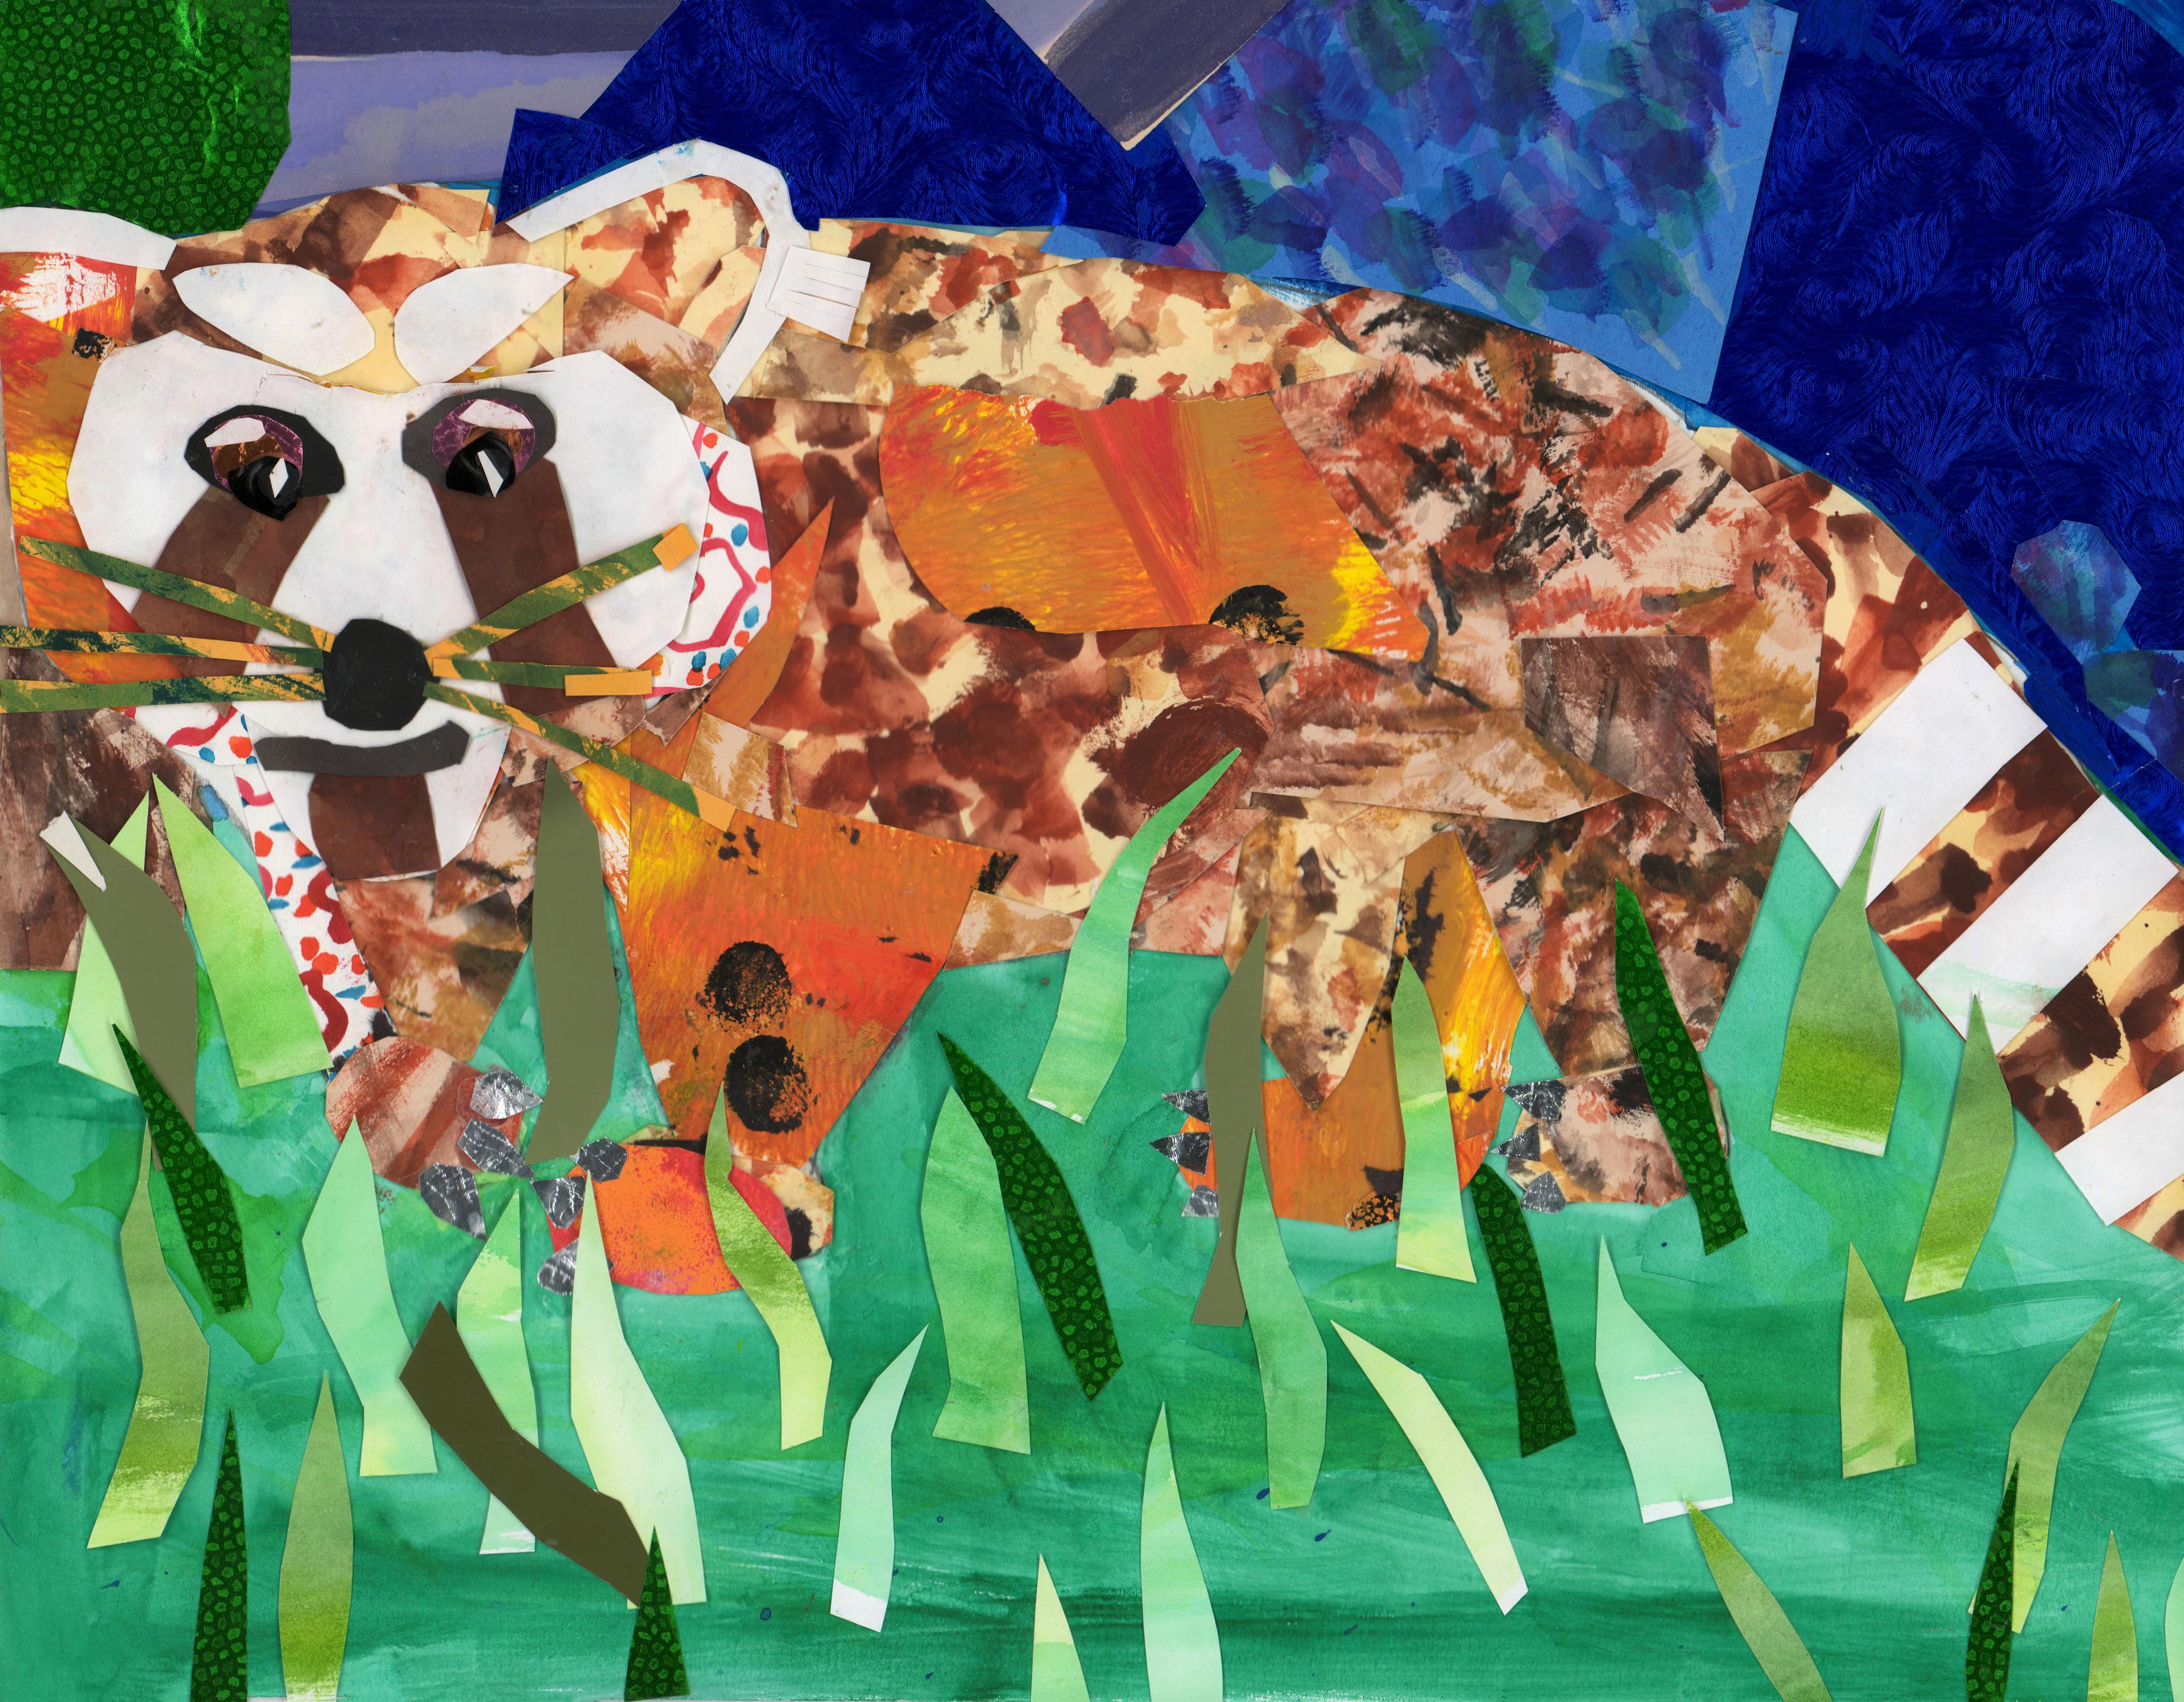 Illustration of a red panda crouched in tall green blades of grass created with collaged painted paper. The panda's body faces left with its eyes facing the viewer. The image is composed of colored and textured paper cutouts. The panda's face is white with brown lines descending from its eyes and chin. The panda's tail is white with brown stripes. The background of the collage is a dark blue.